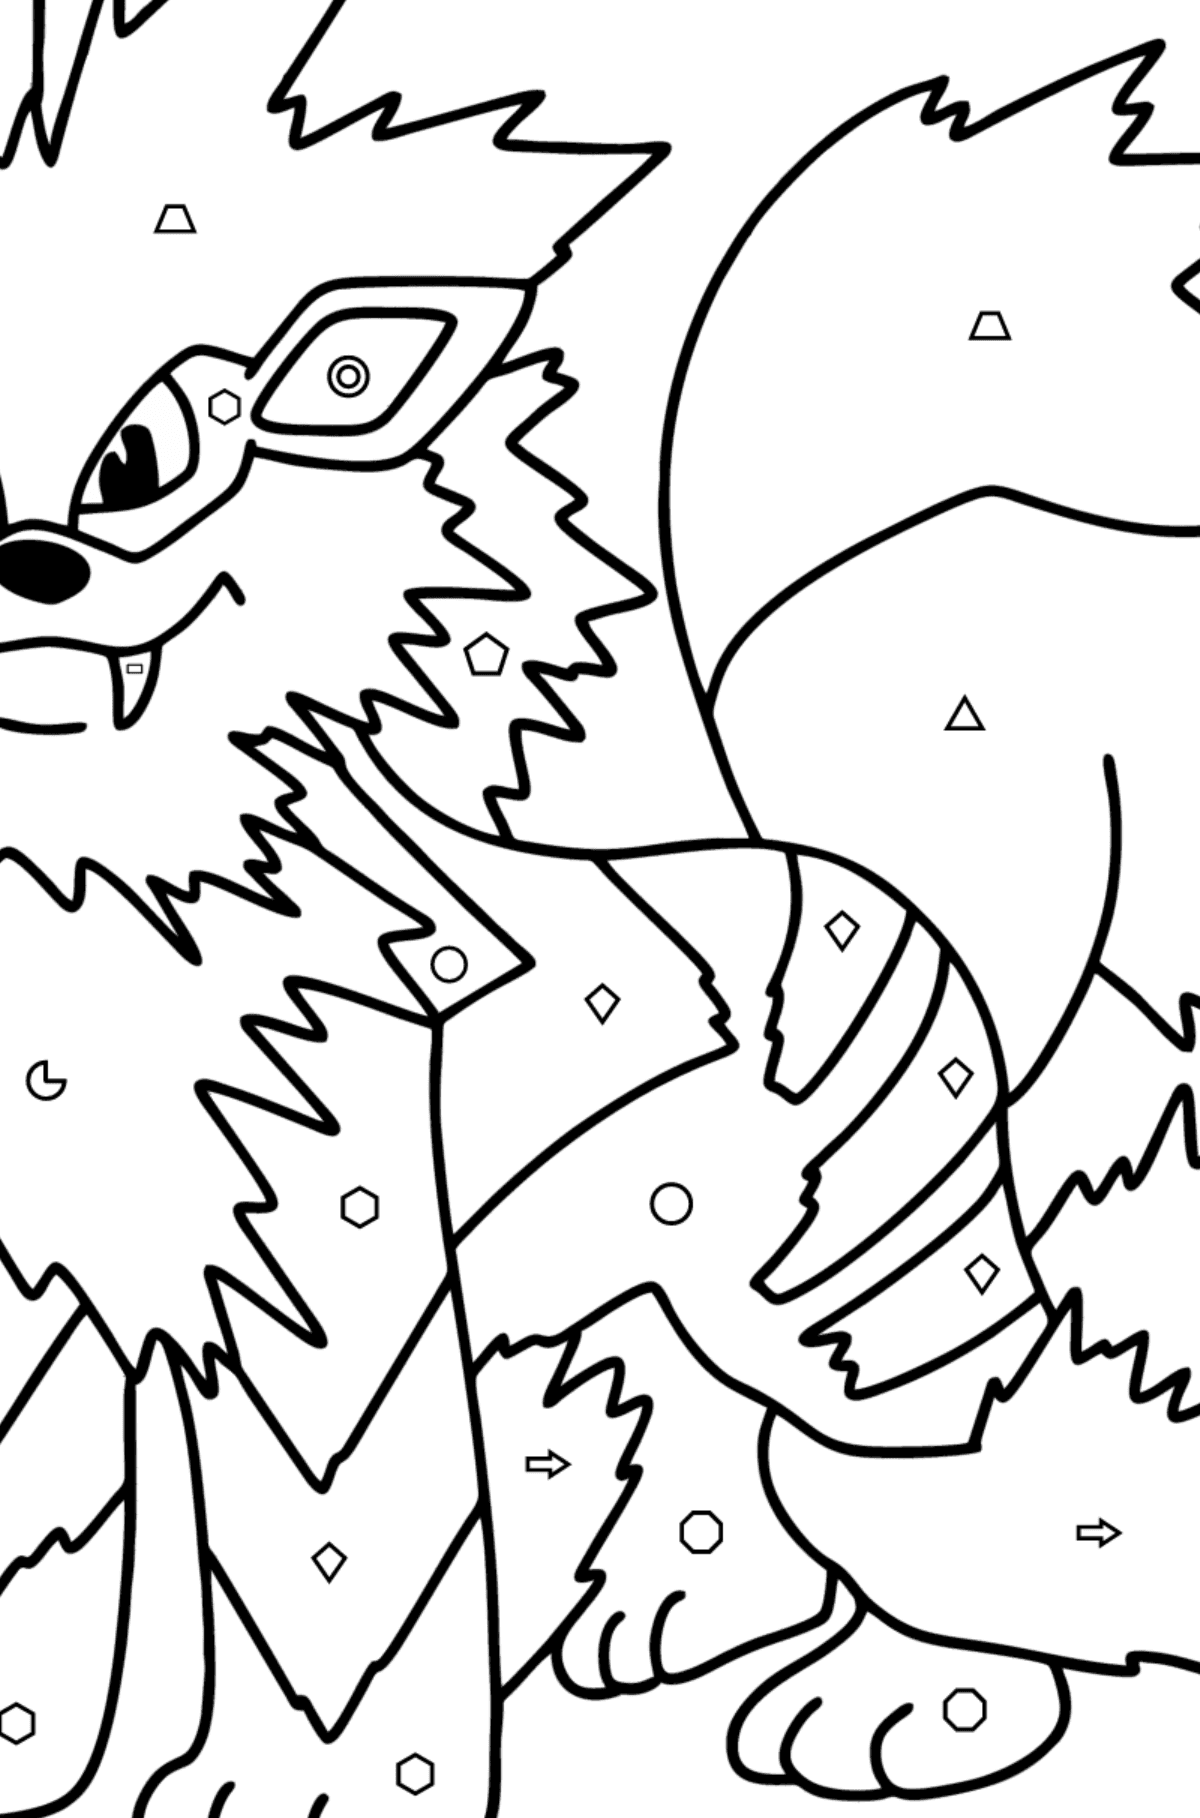 Pokémon Go Arcanine coloring page - Coloring by Geometric Shapes for Kids